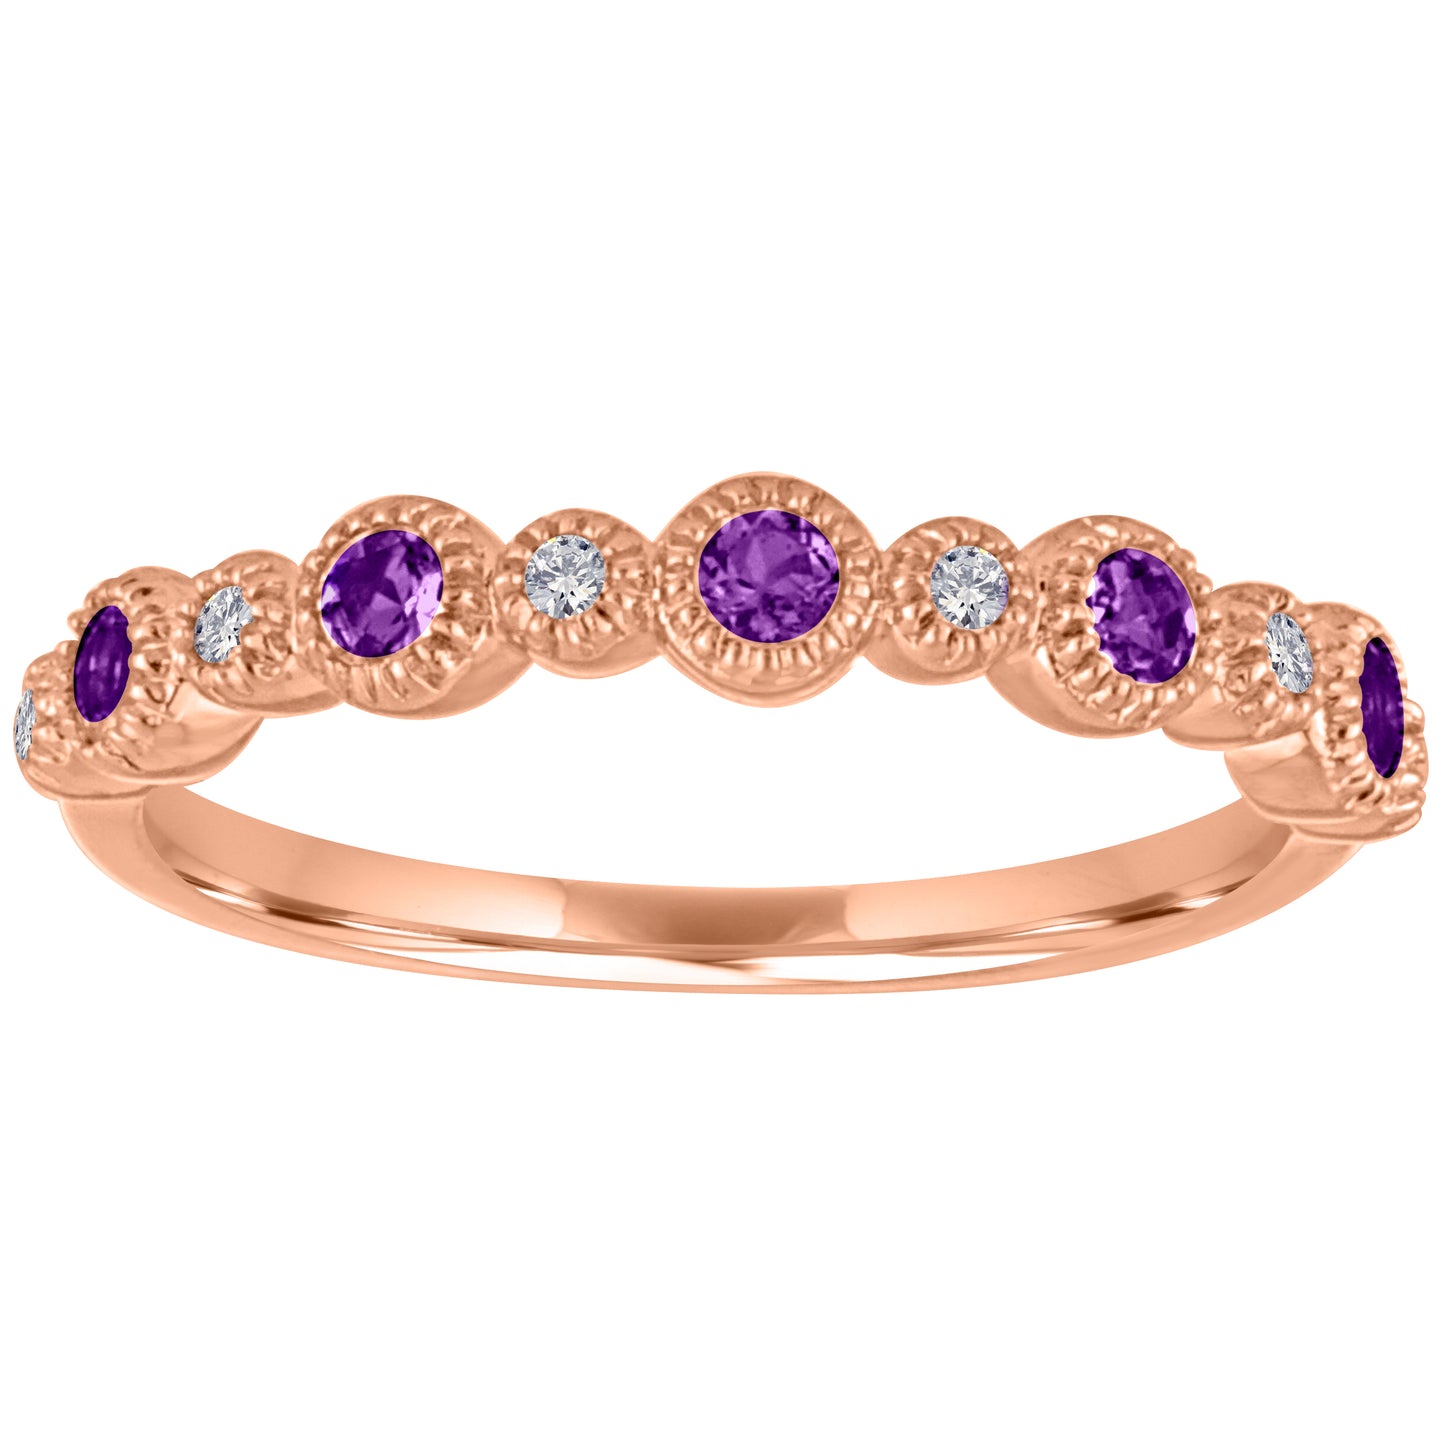 Rose gold skinny band with large round amethysts and small round diamonds. 